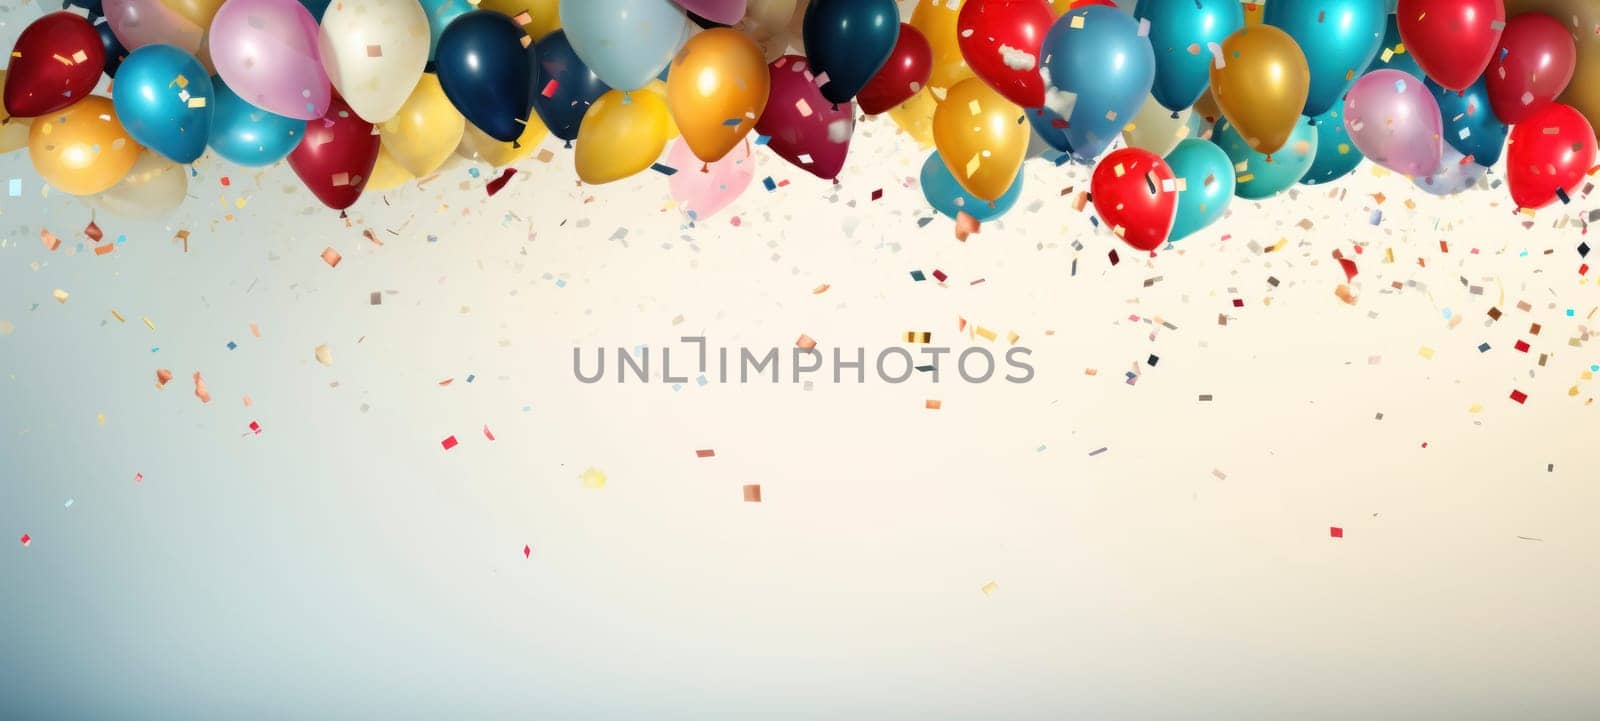 A cascade of multicolored balloons and confetti creates a vibrant atmosphere for a festive celebration.